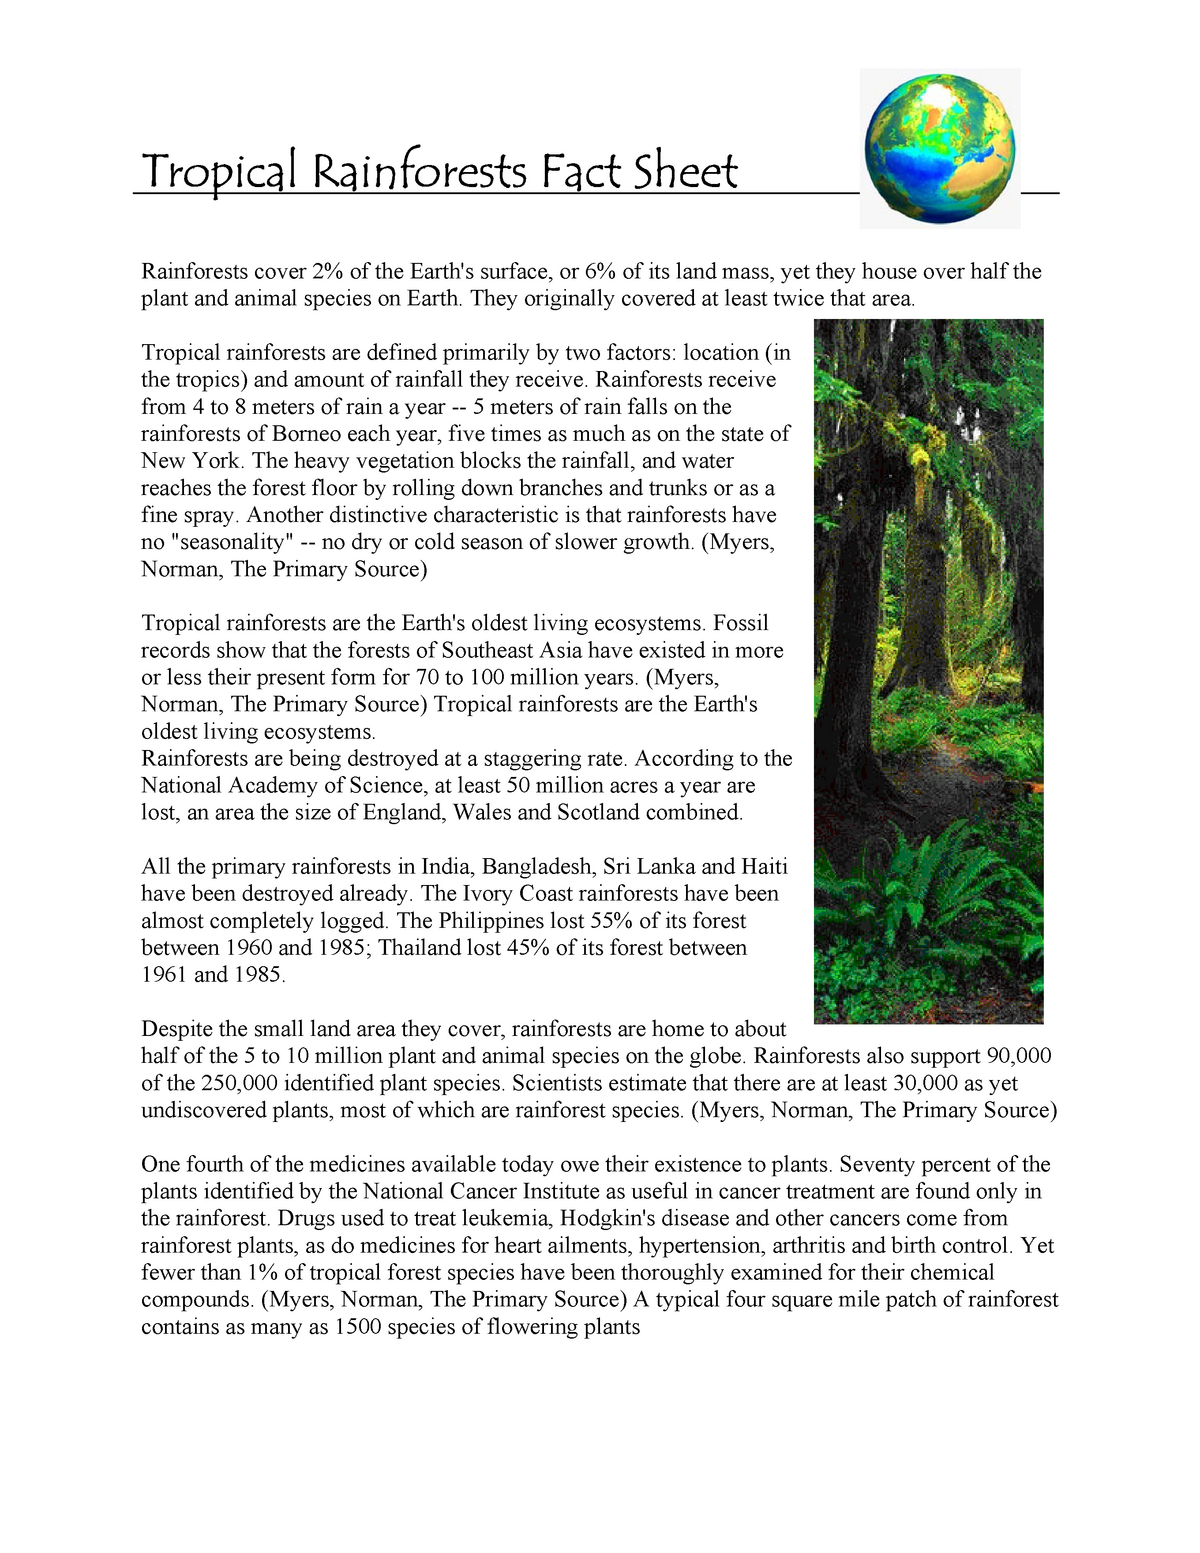 Natural Resources Rain Forest Fact Sheet Tropical Rainforests Fact Sheet Rainforests Cover 2 5145